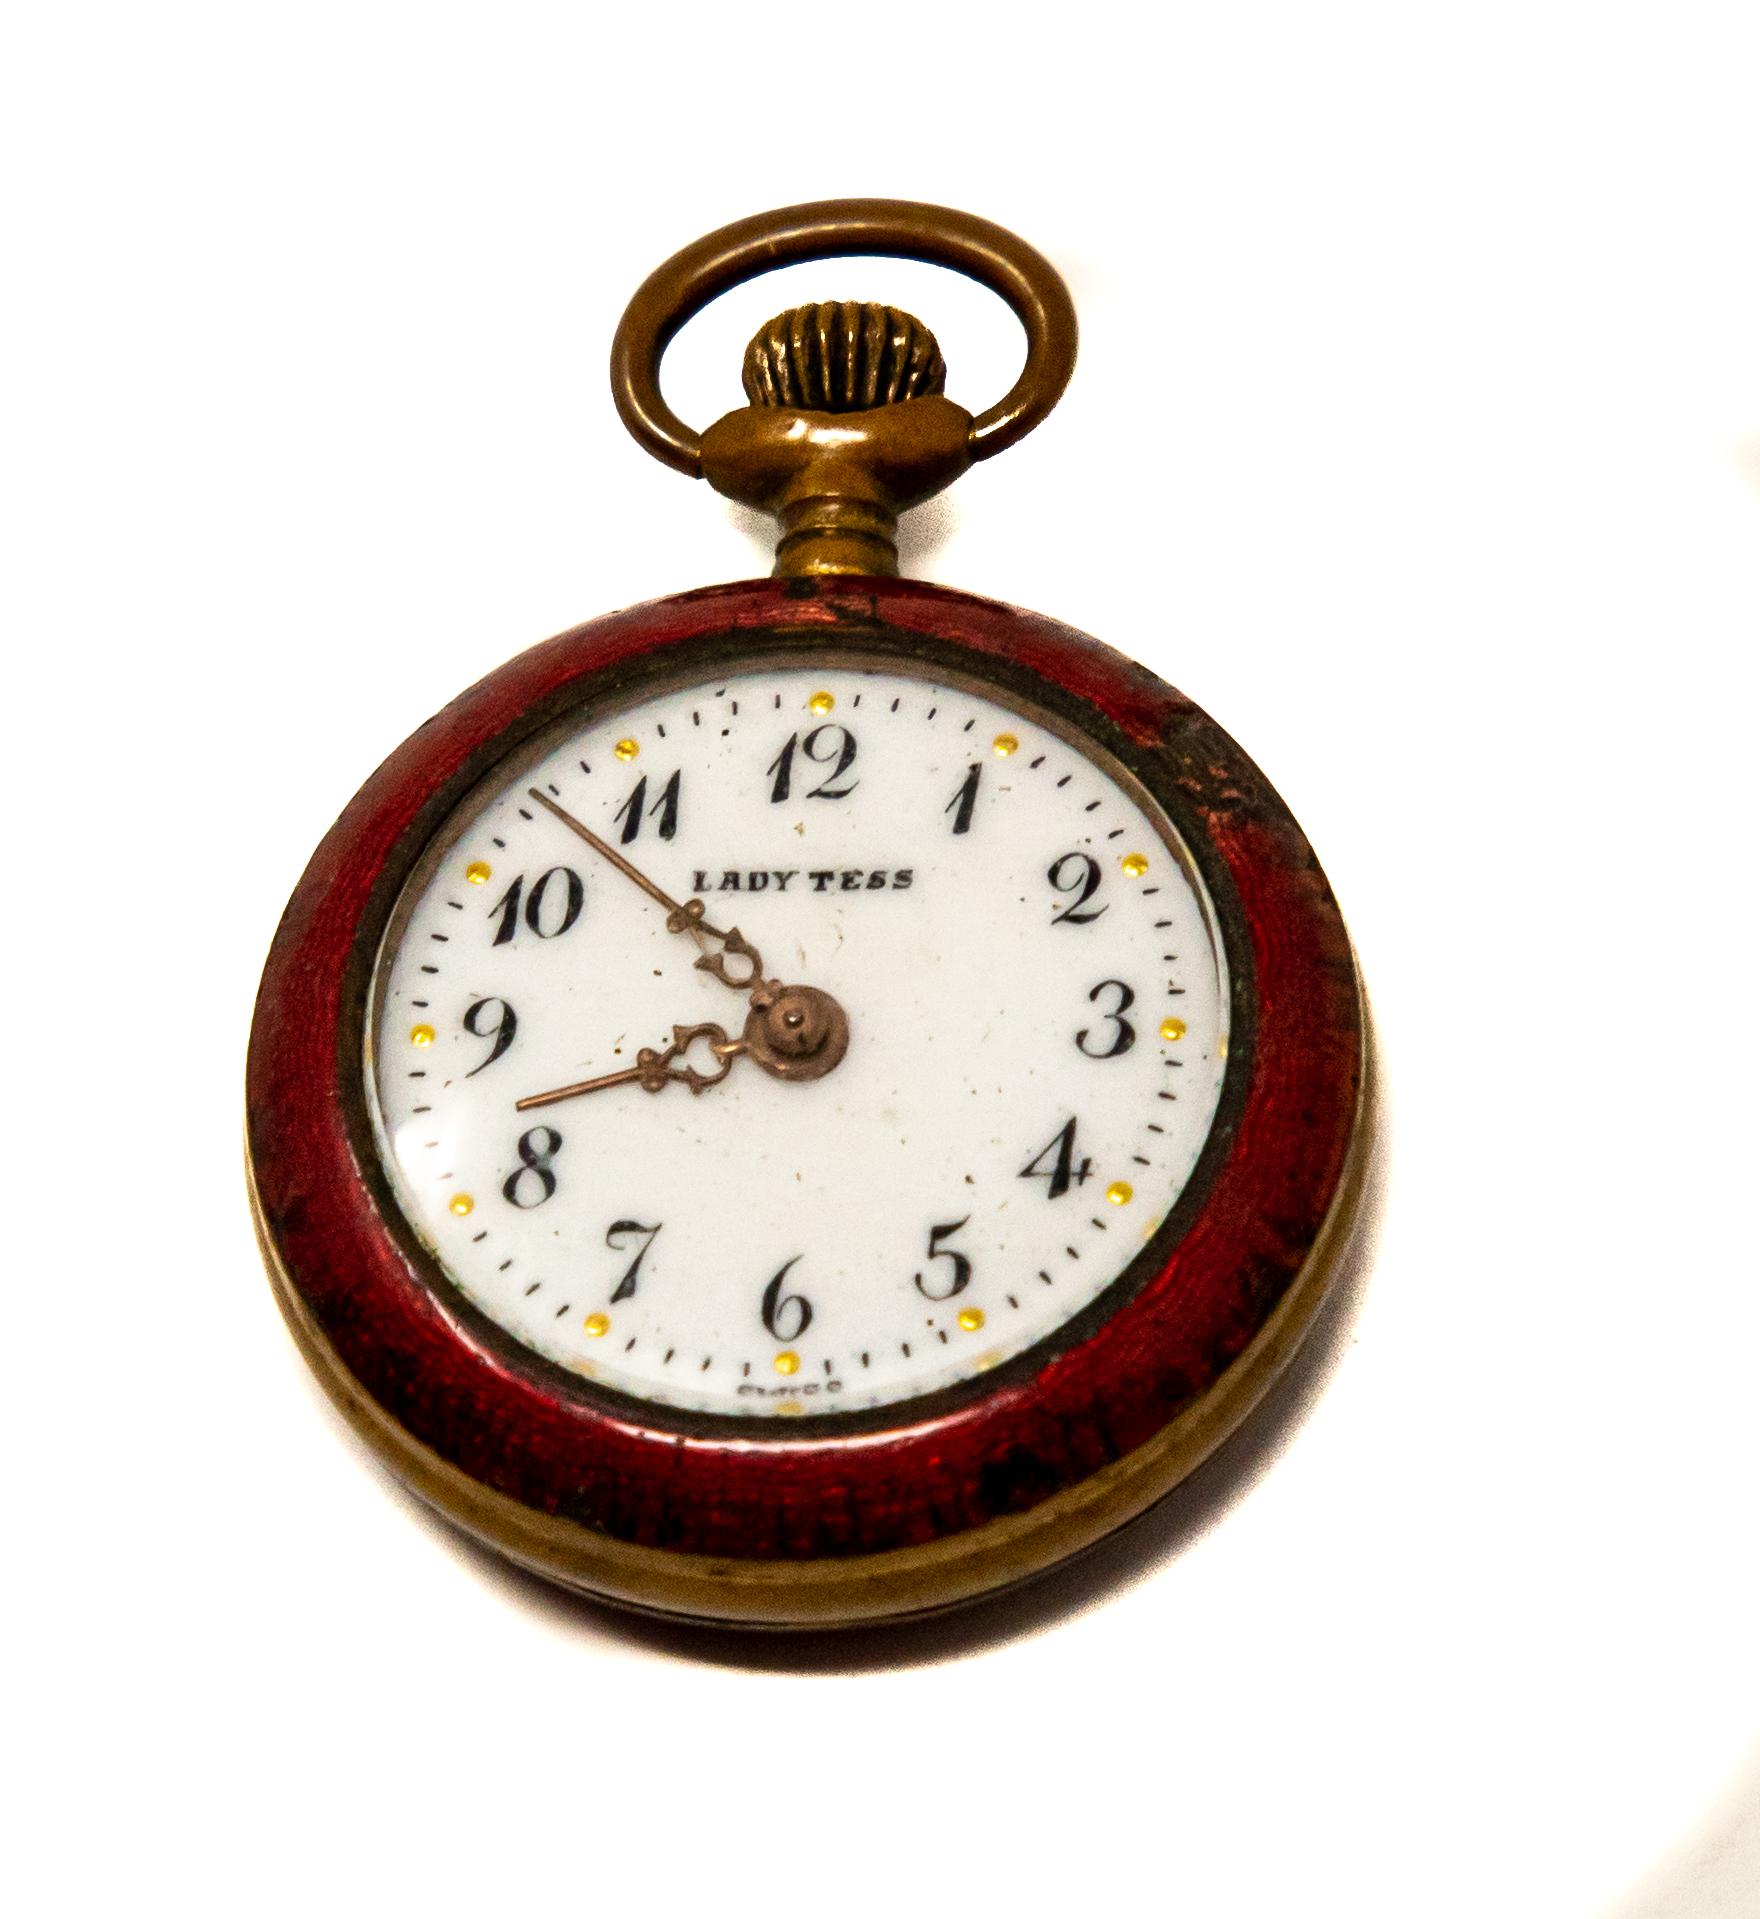 Offering this sweet little ladies pocket watch. Marked Lady Tess on the face of the watch and on the bottom marked Swiss. Having red enamel around the face and over the back of the brass body.